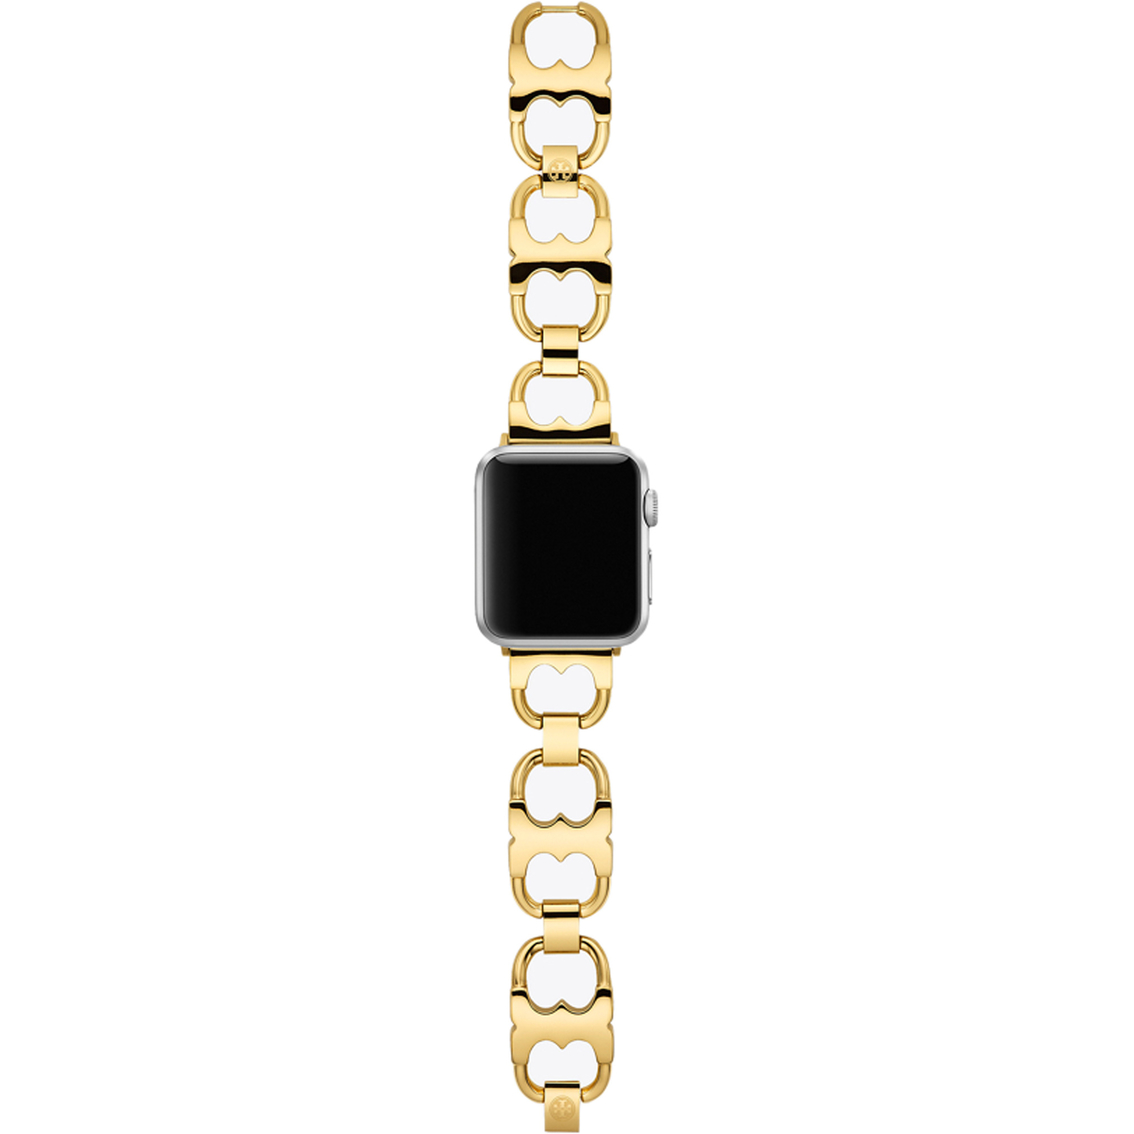 Tory Burch Women's McGraw Gold Stainless Steel 38mm Bands for Apple Watches TBS0013 - Image 3 of 4